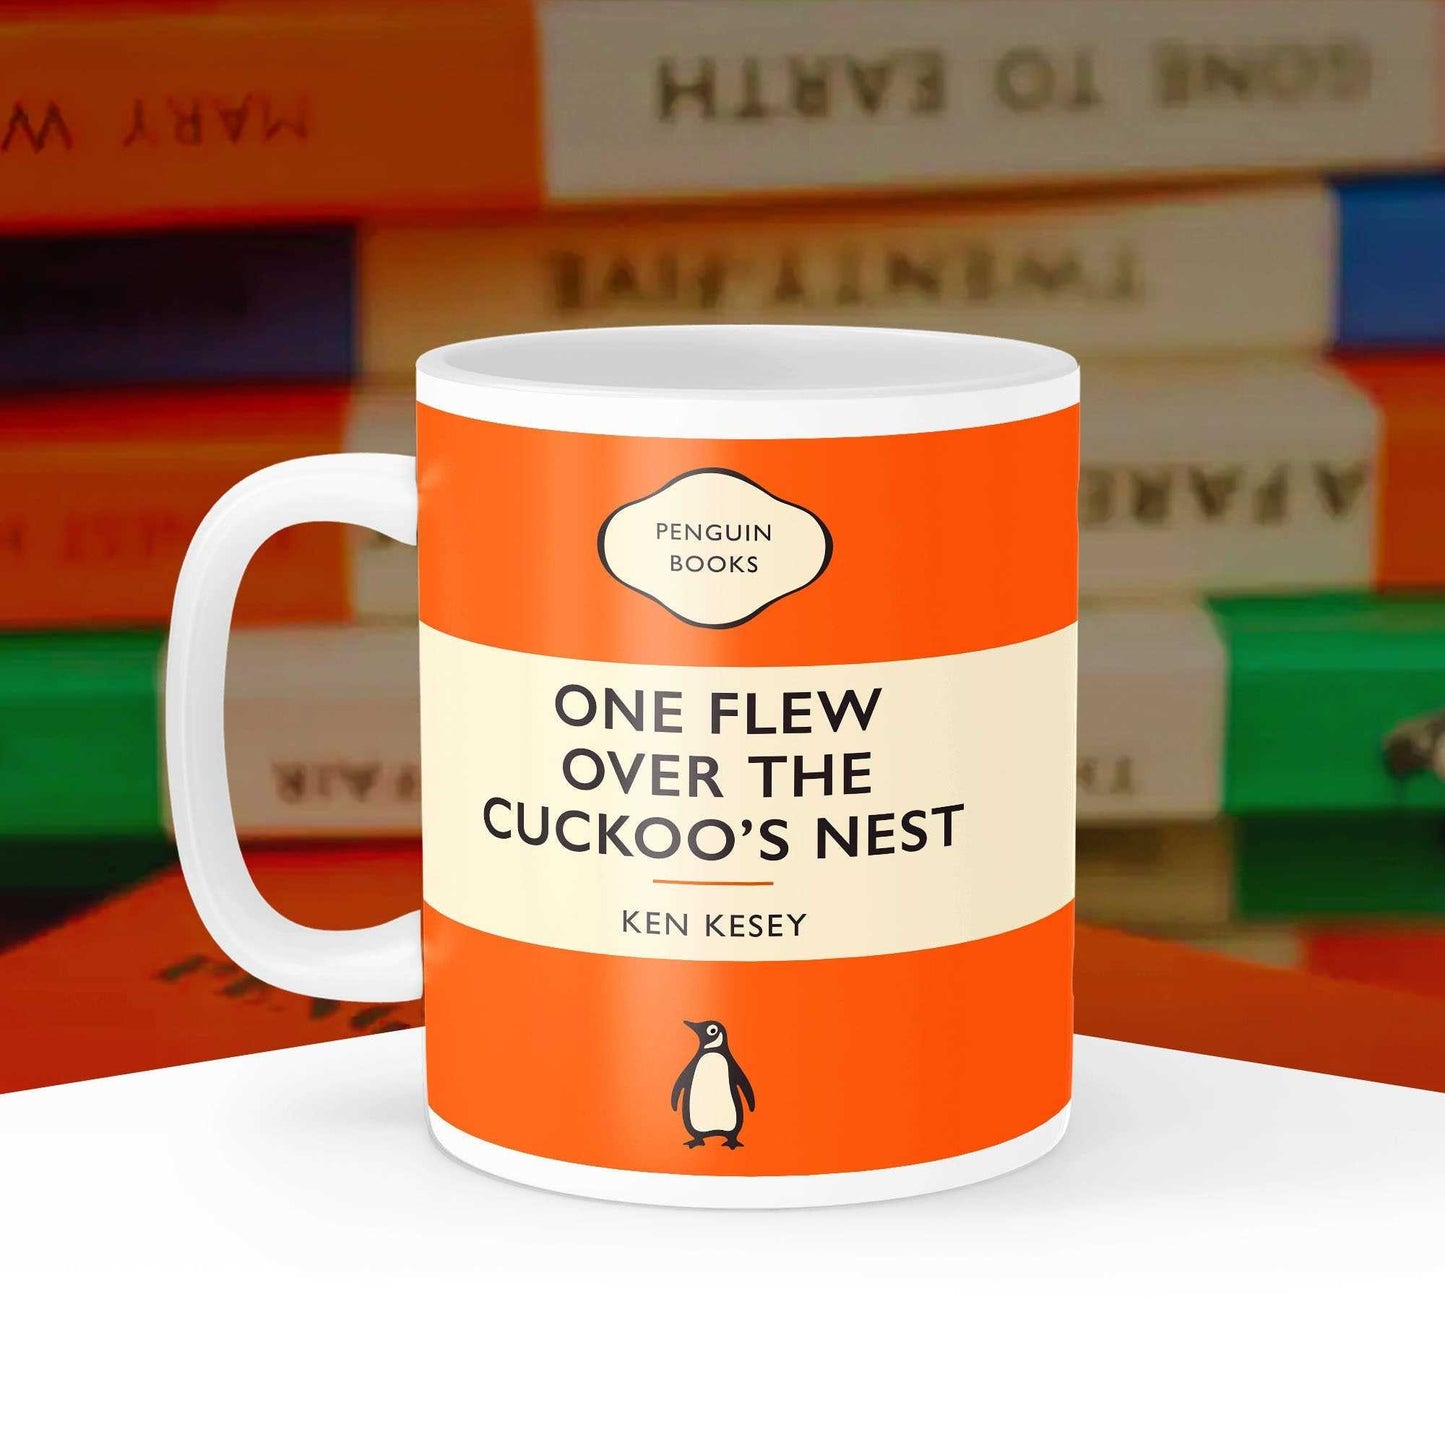 One Flew Over the Cuckoo's Nest - Ken Kesey Penguin Book Cover Mug